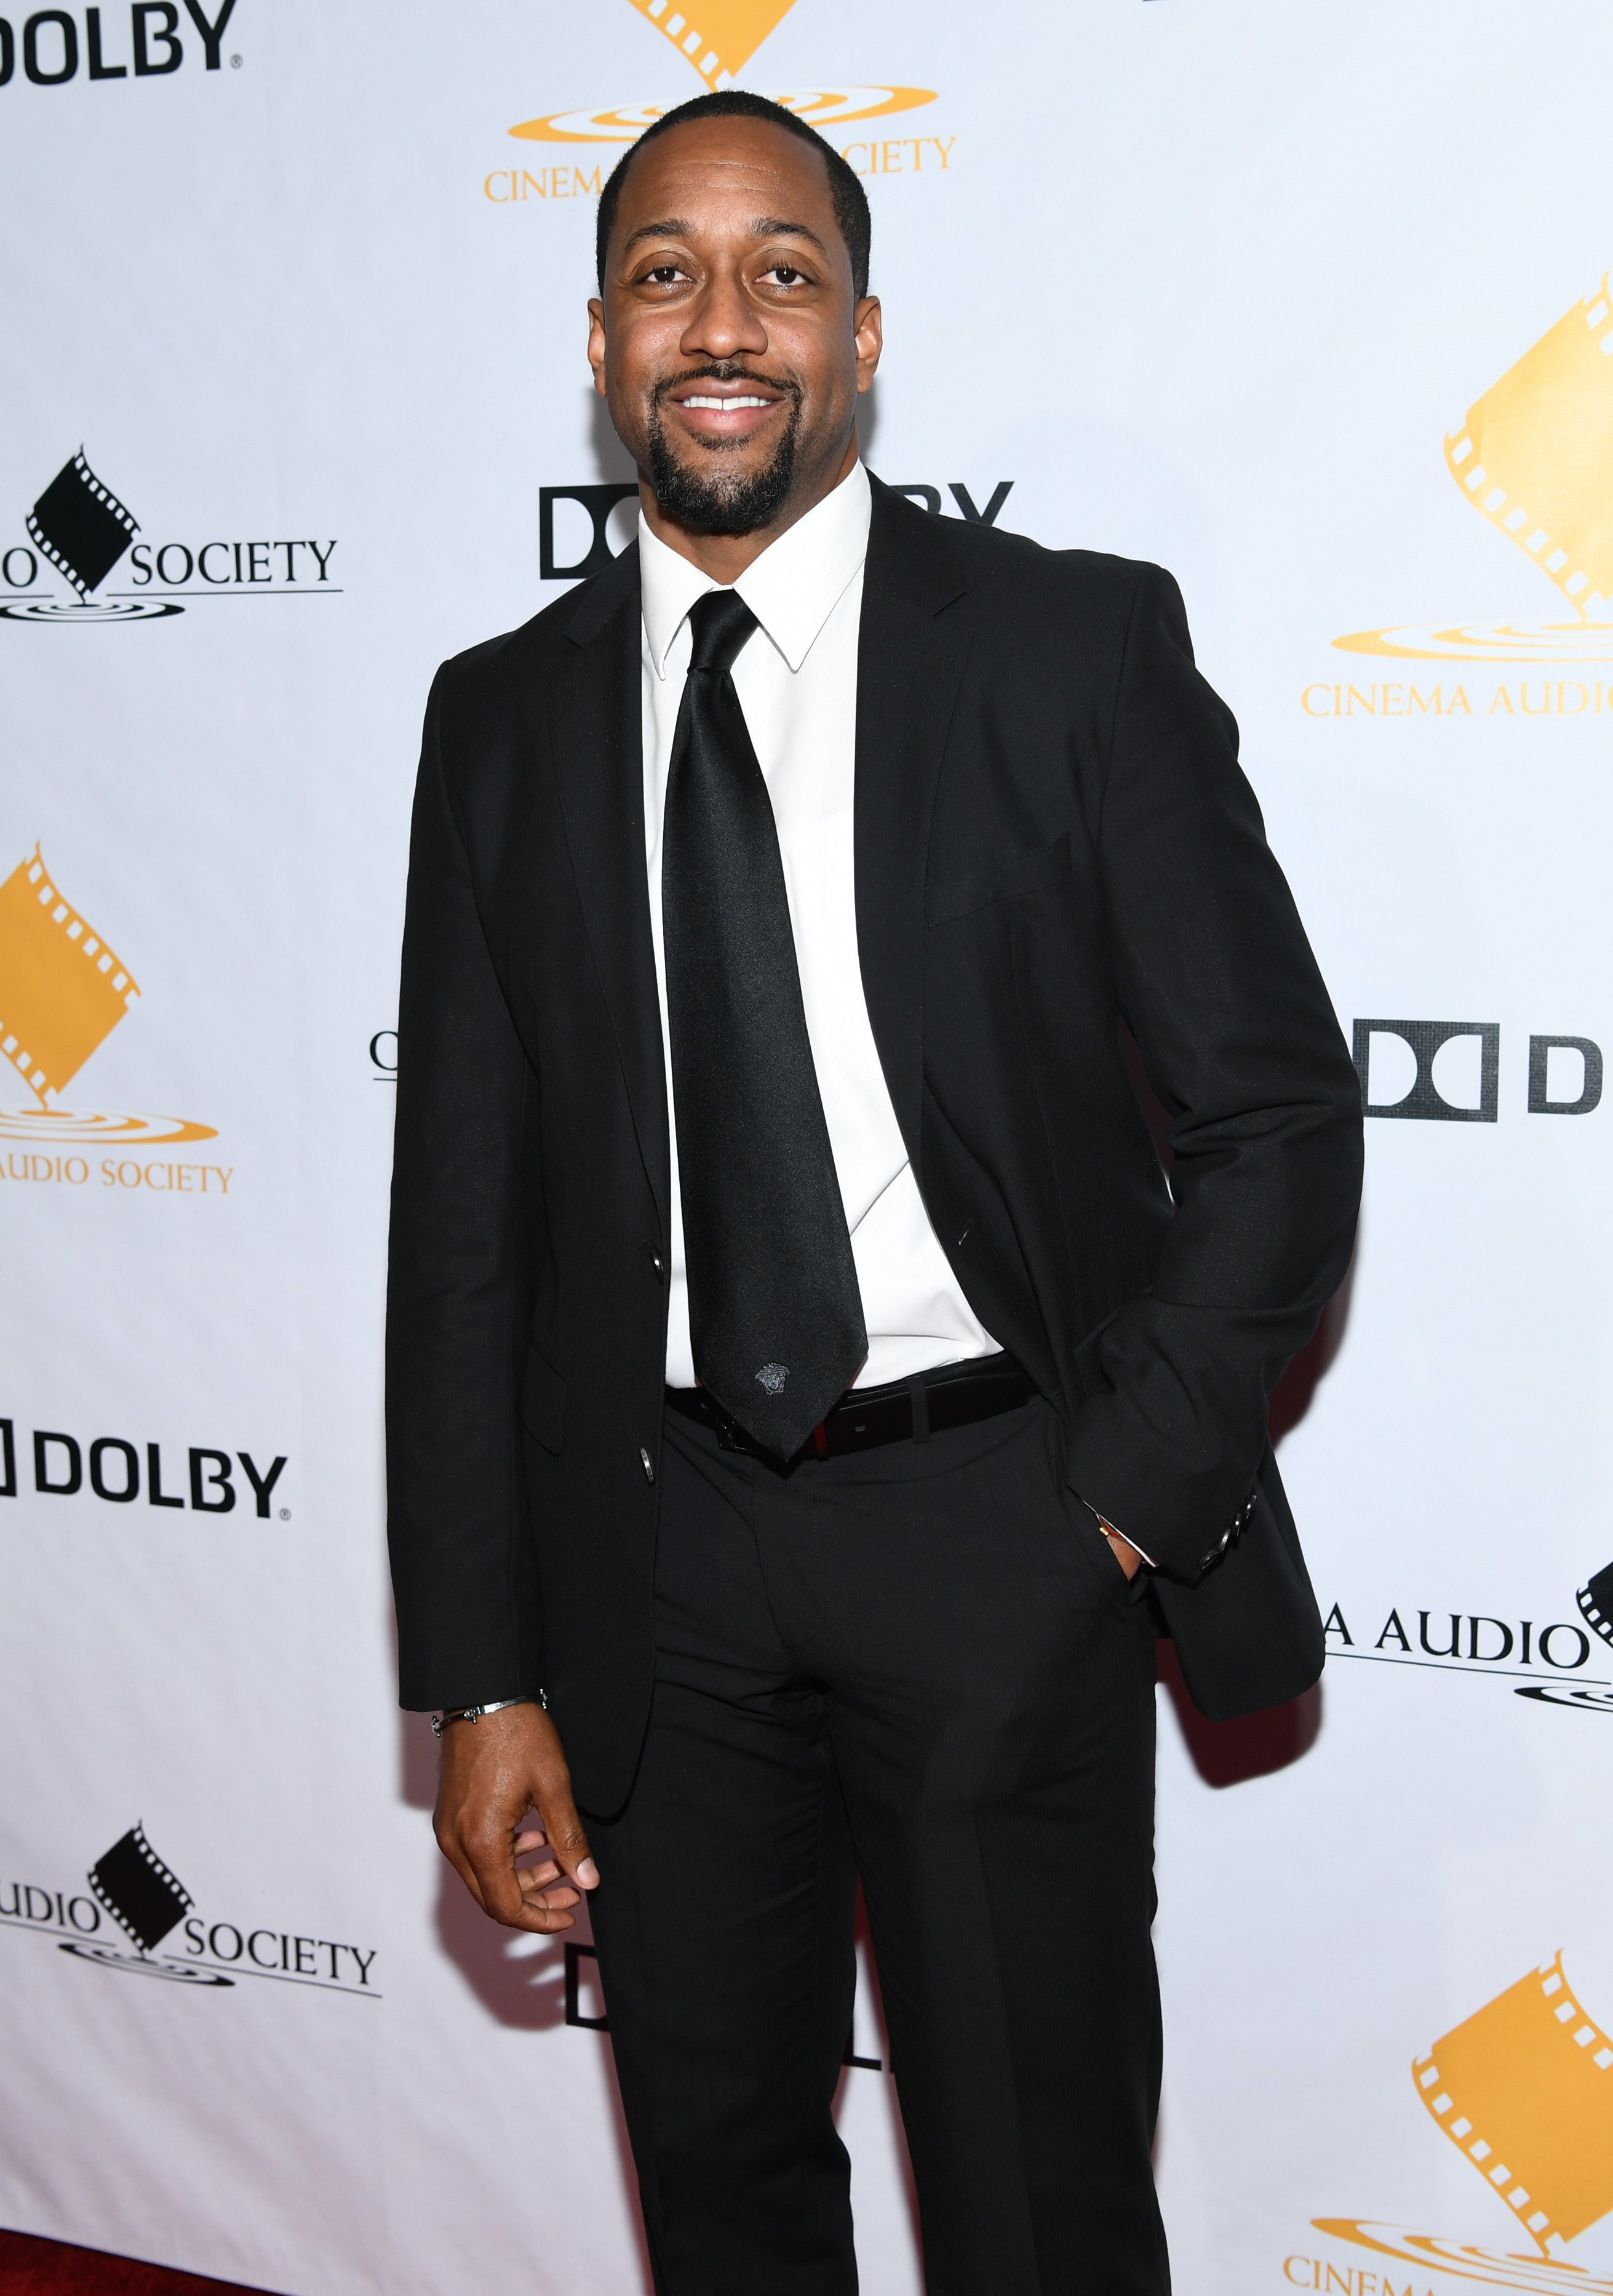 Jaleel White at the 54th annual Cinema Audio Society Awards at Omni Los Angeles Hotel | Source: Getty Images